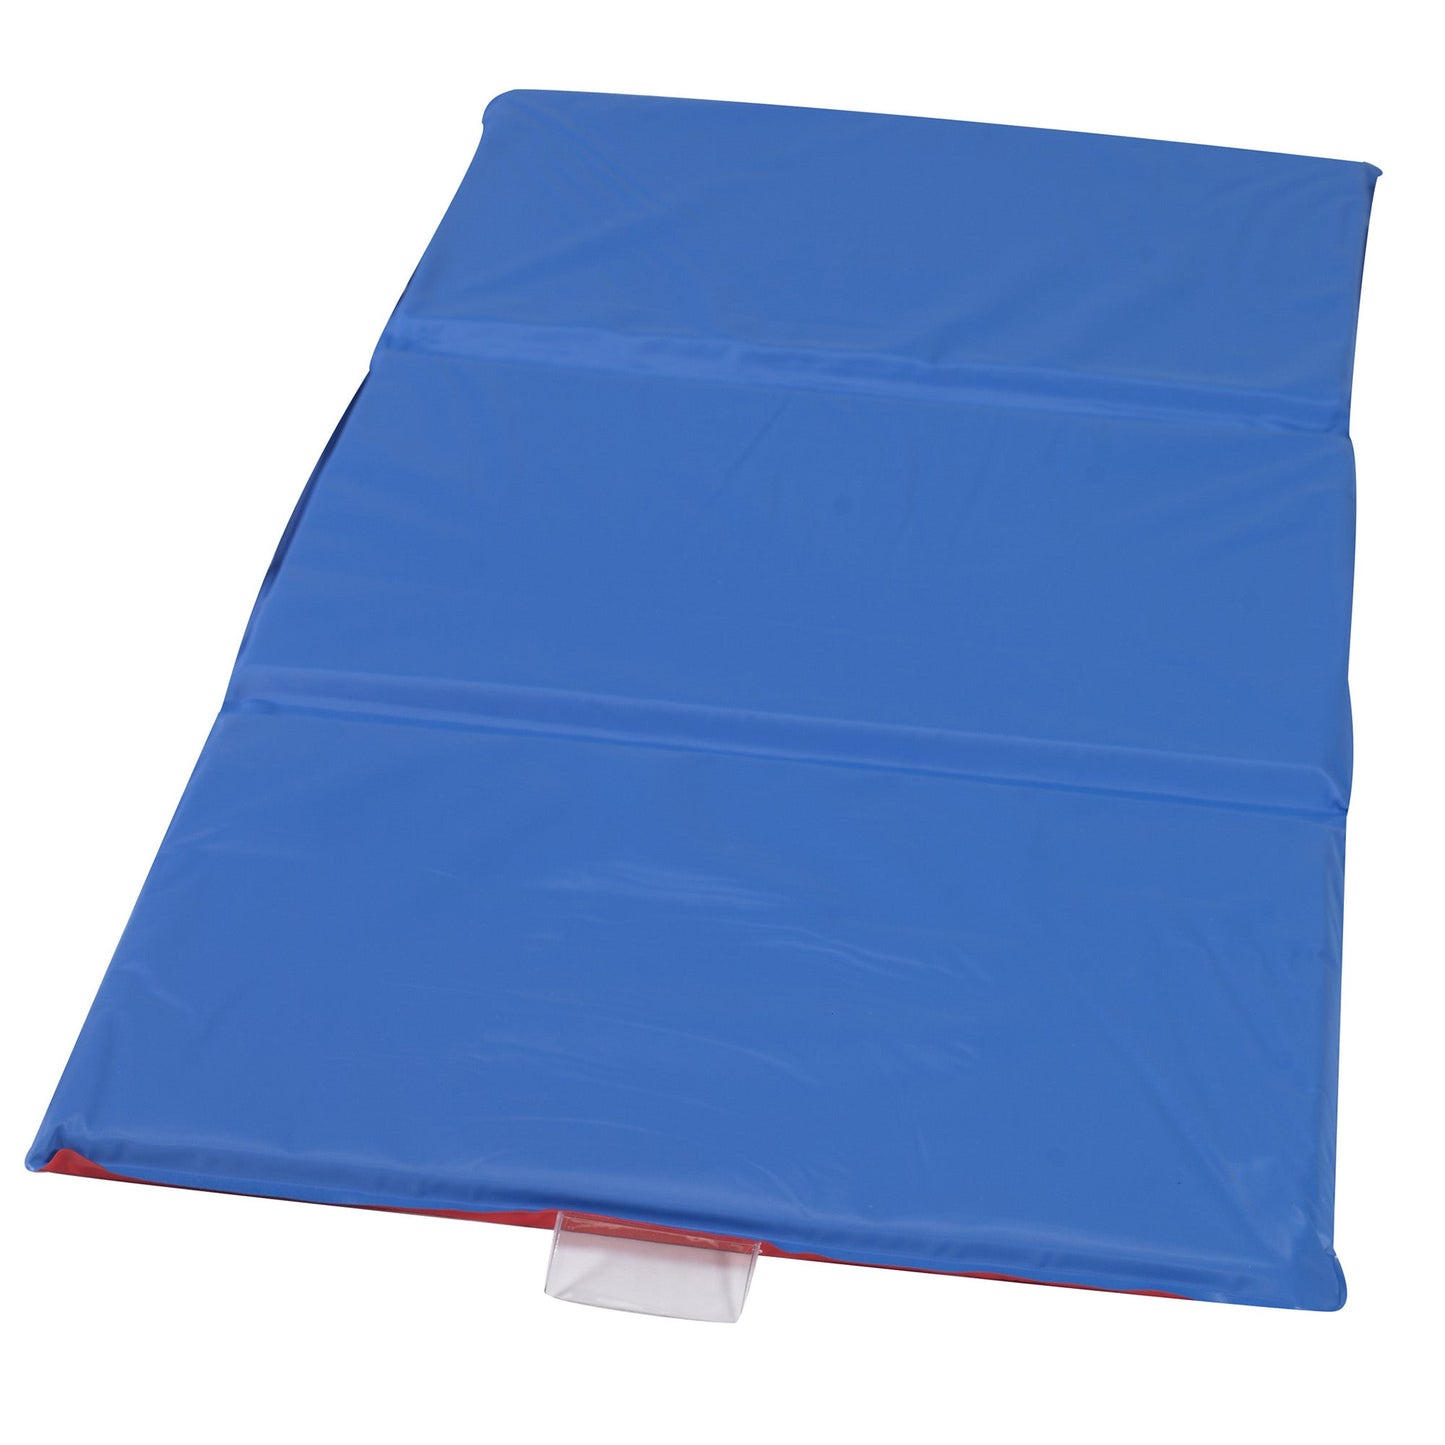 Children's Factory 1" Infection Control 3 Section Folding Rest Mat - Red/Blue (CF400-502RB) - SchoolOutlet